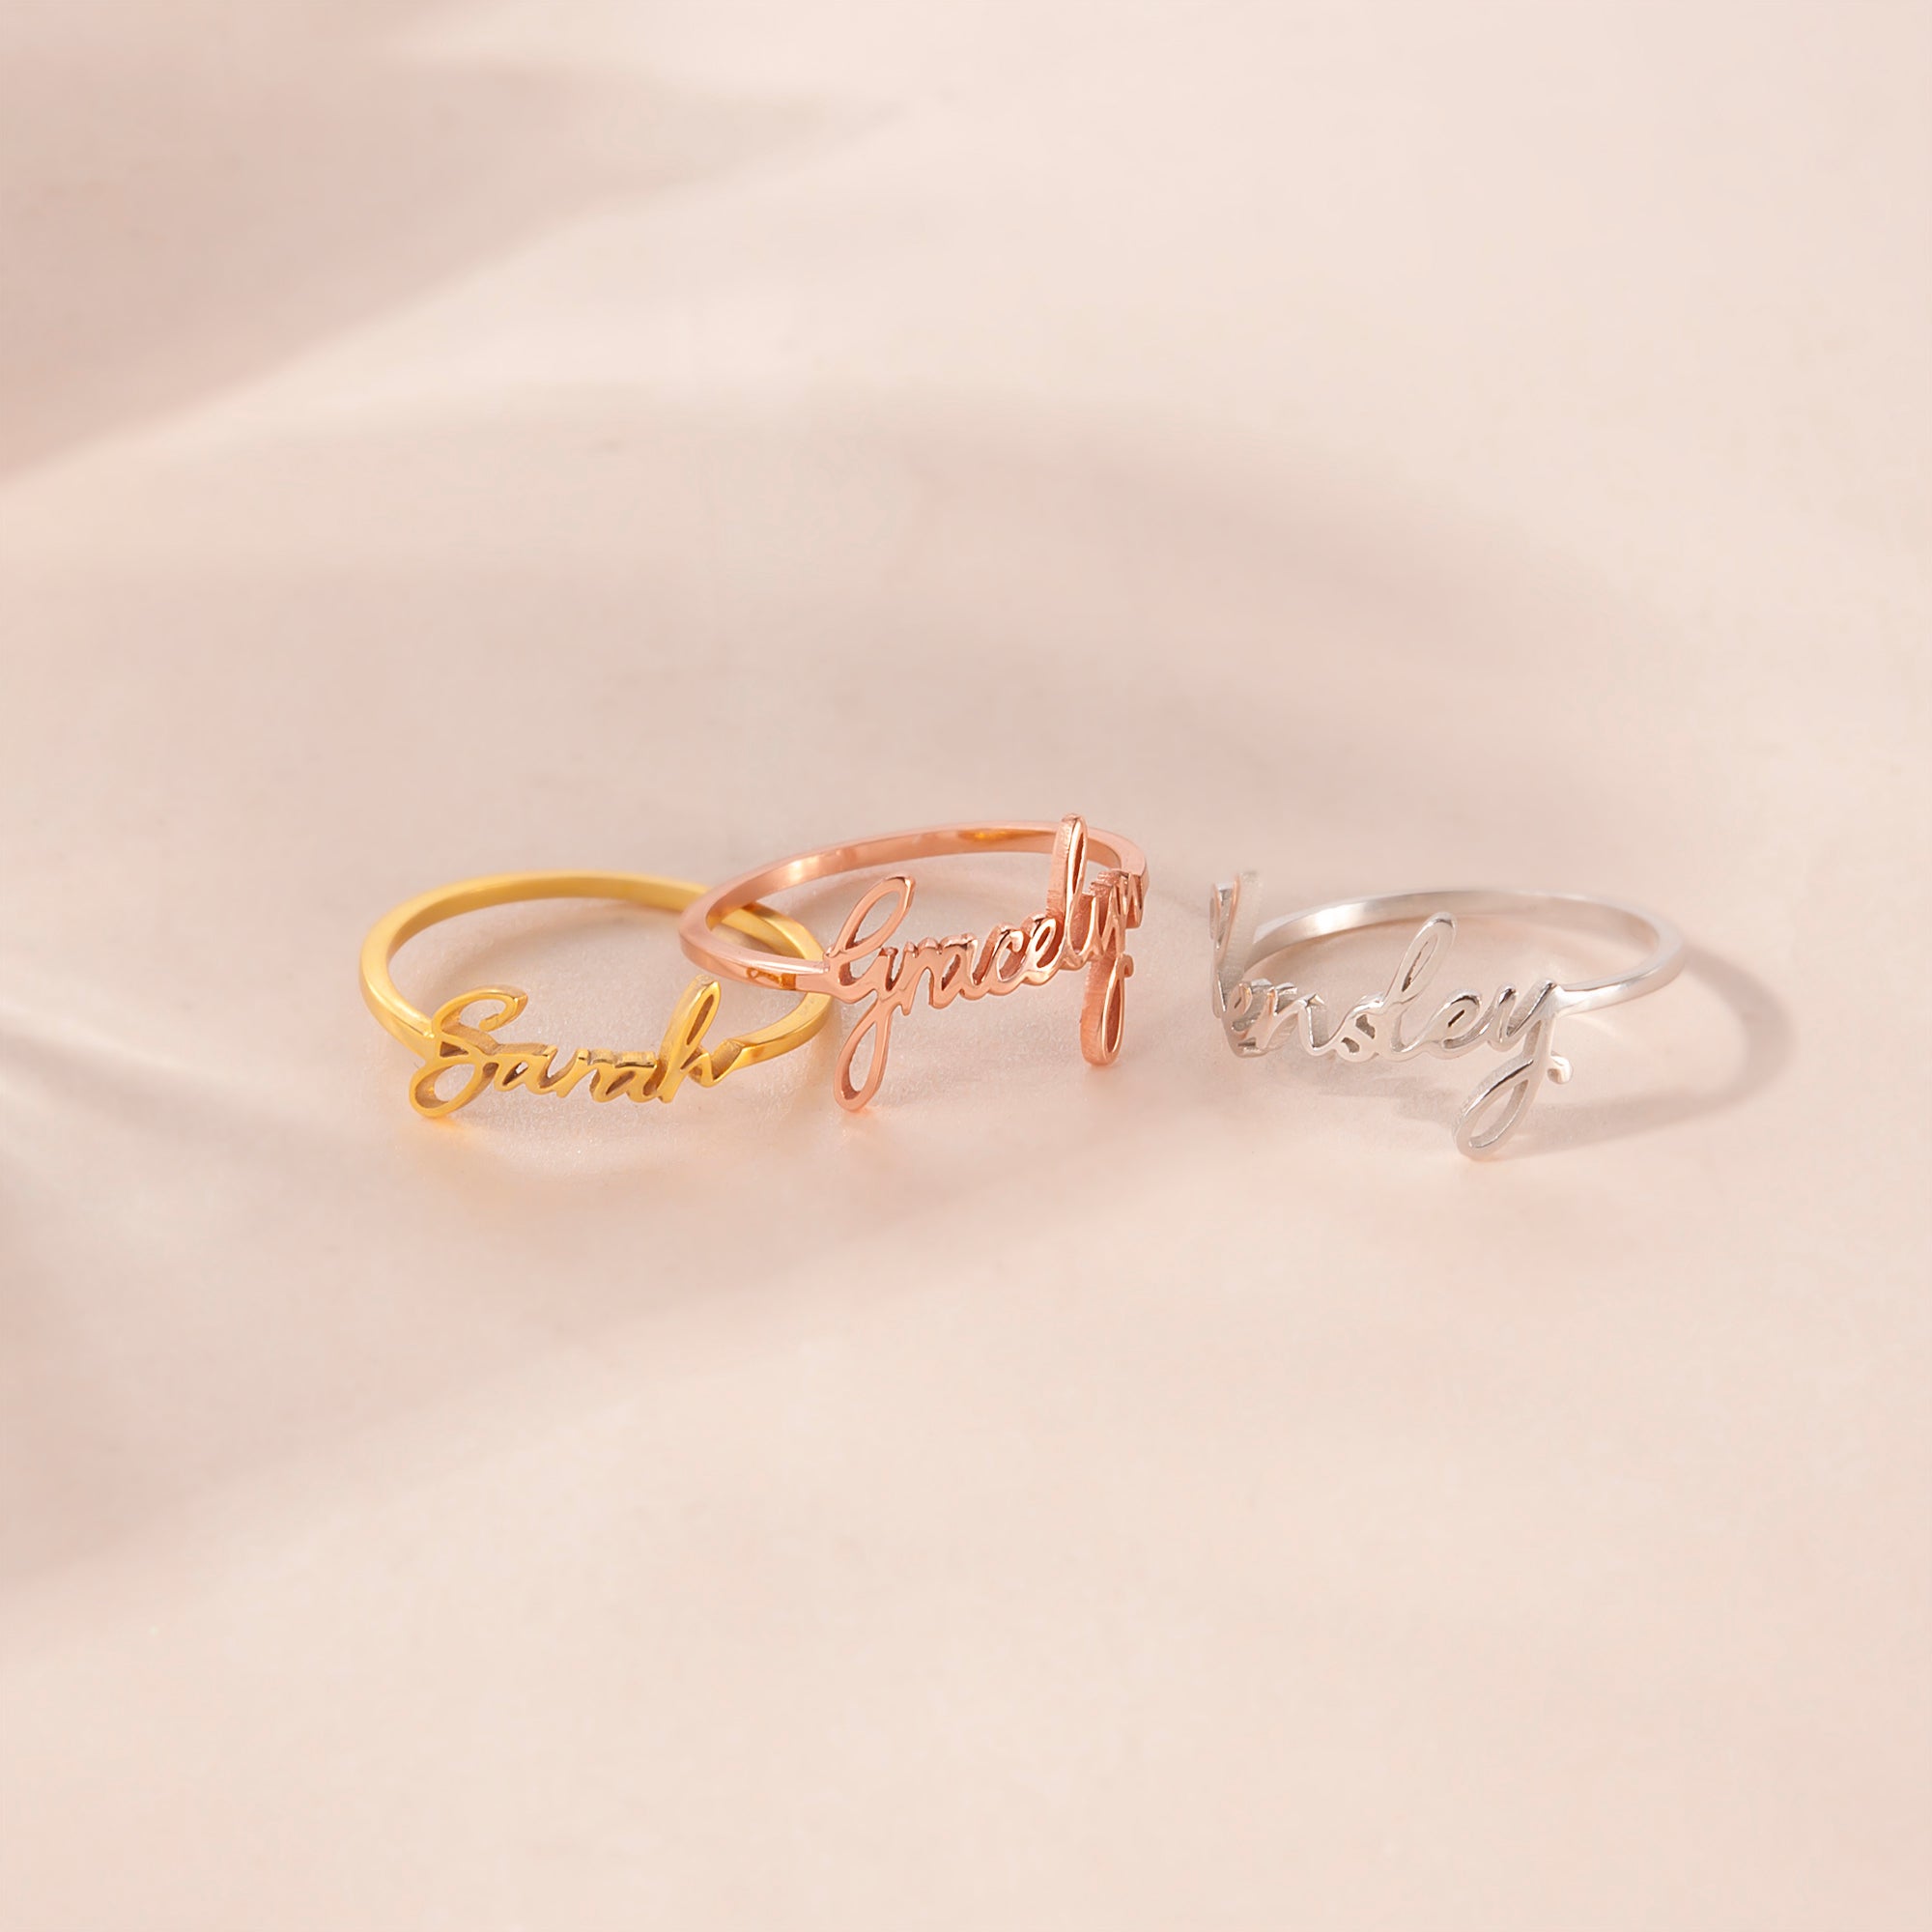 Dad ring personalized with names | kandsimpressions